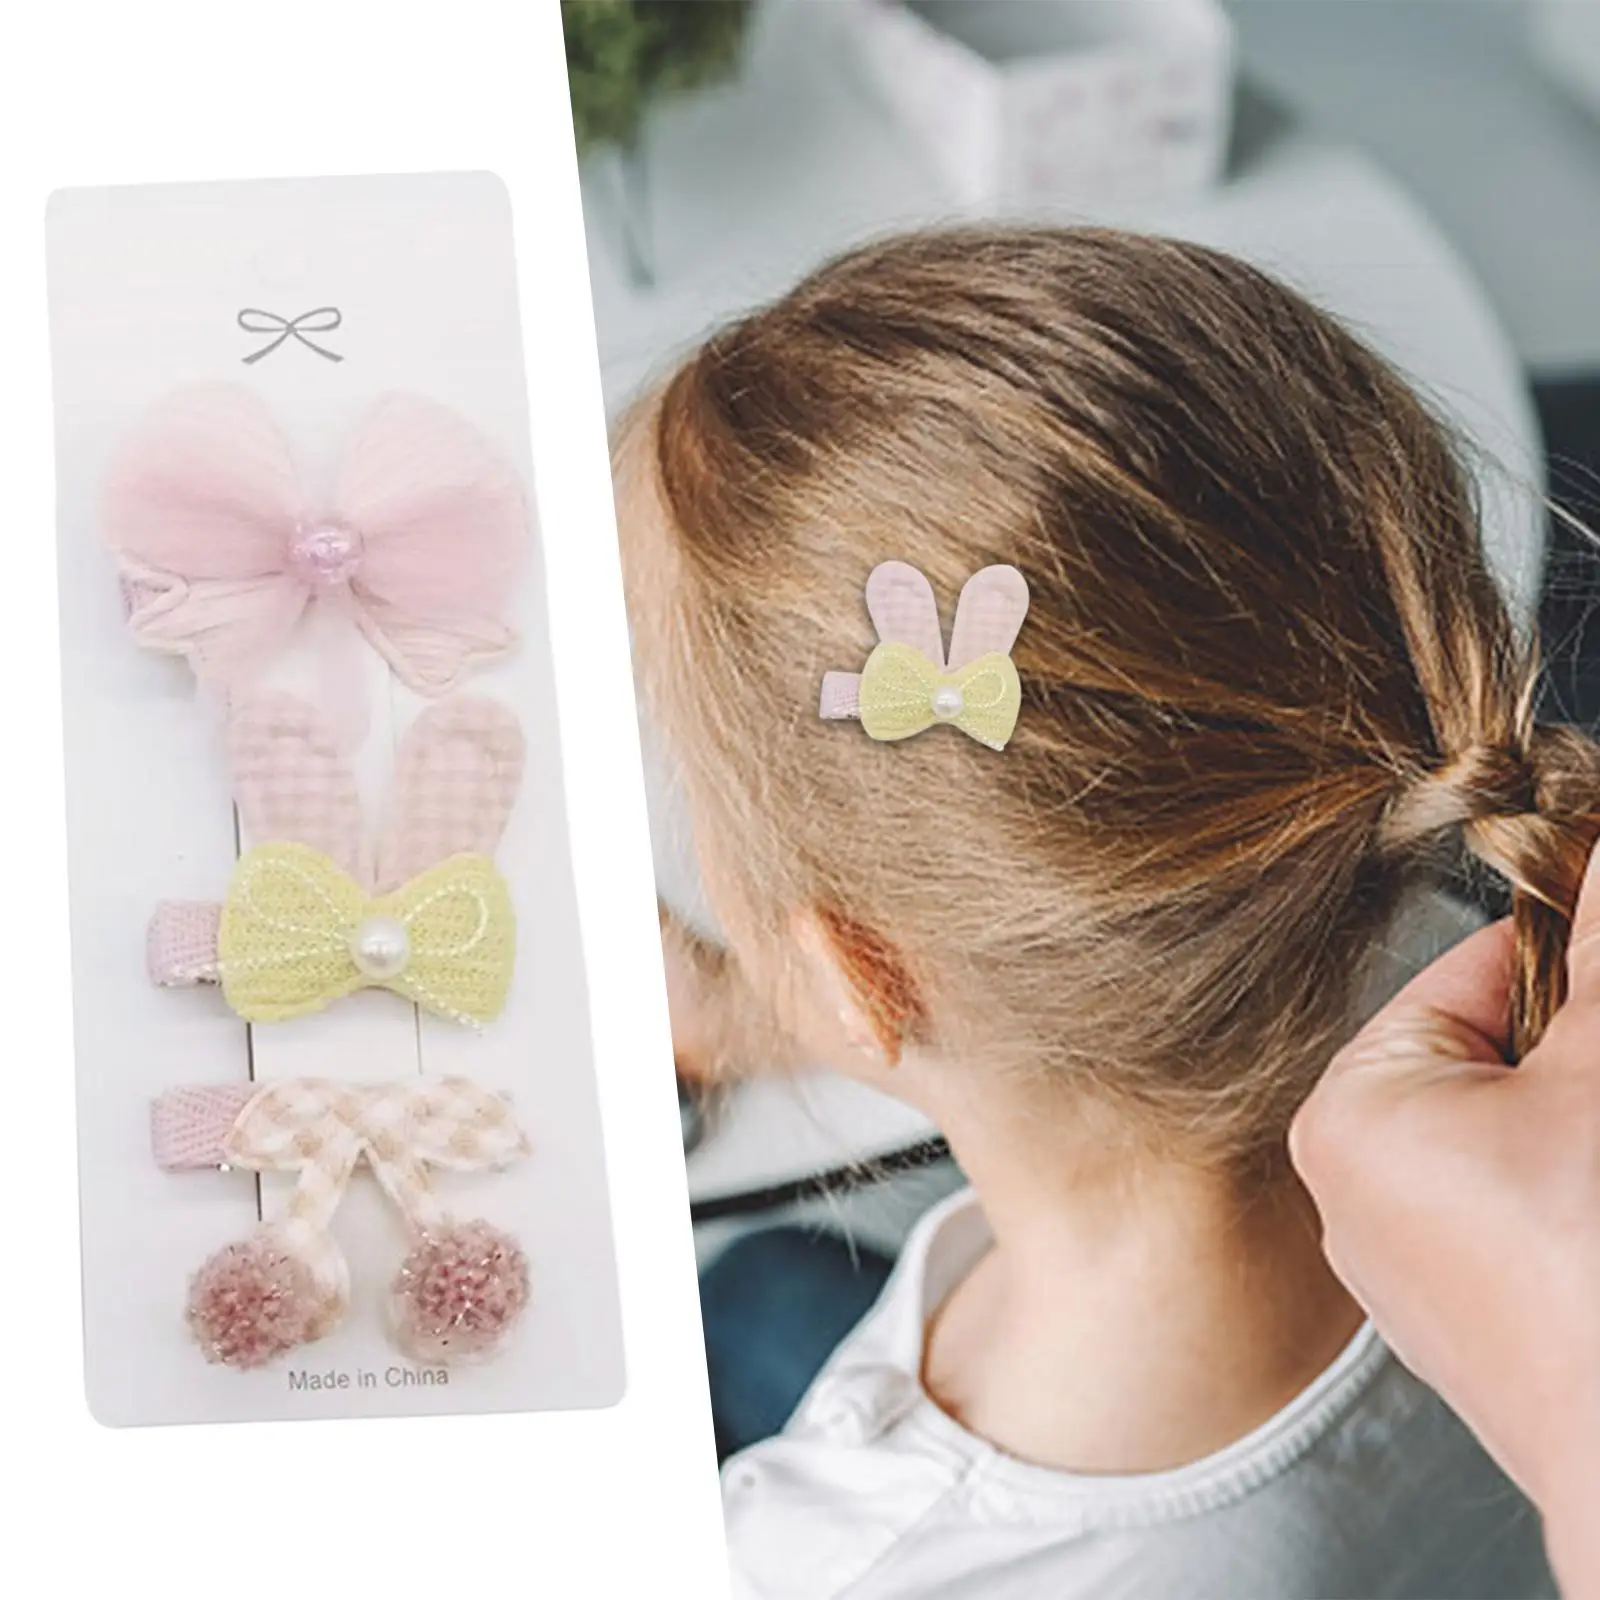 3 Pieces Girls Hair Clips Cartoon Headwear Barrettes for Kids Toddlers Gift